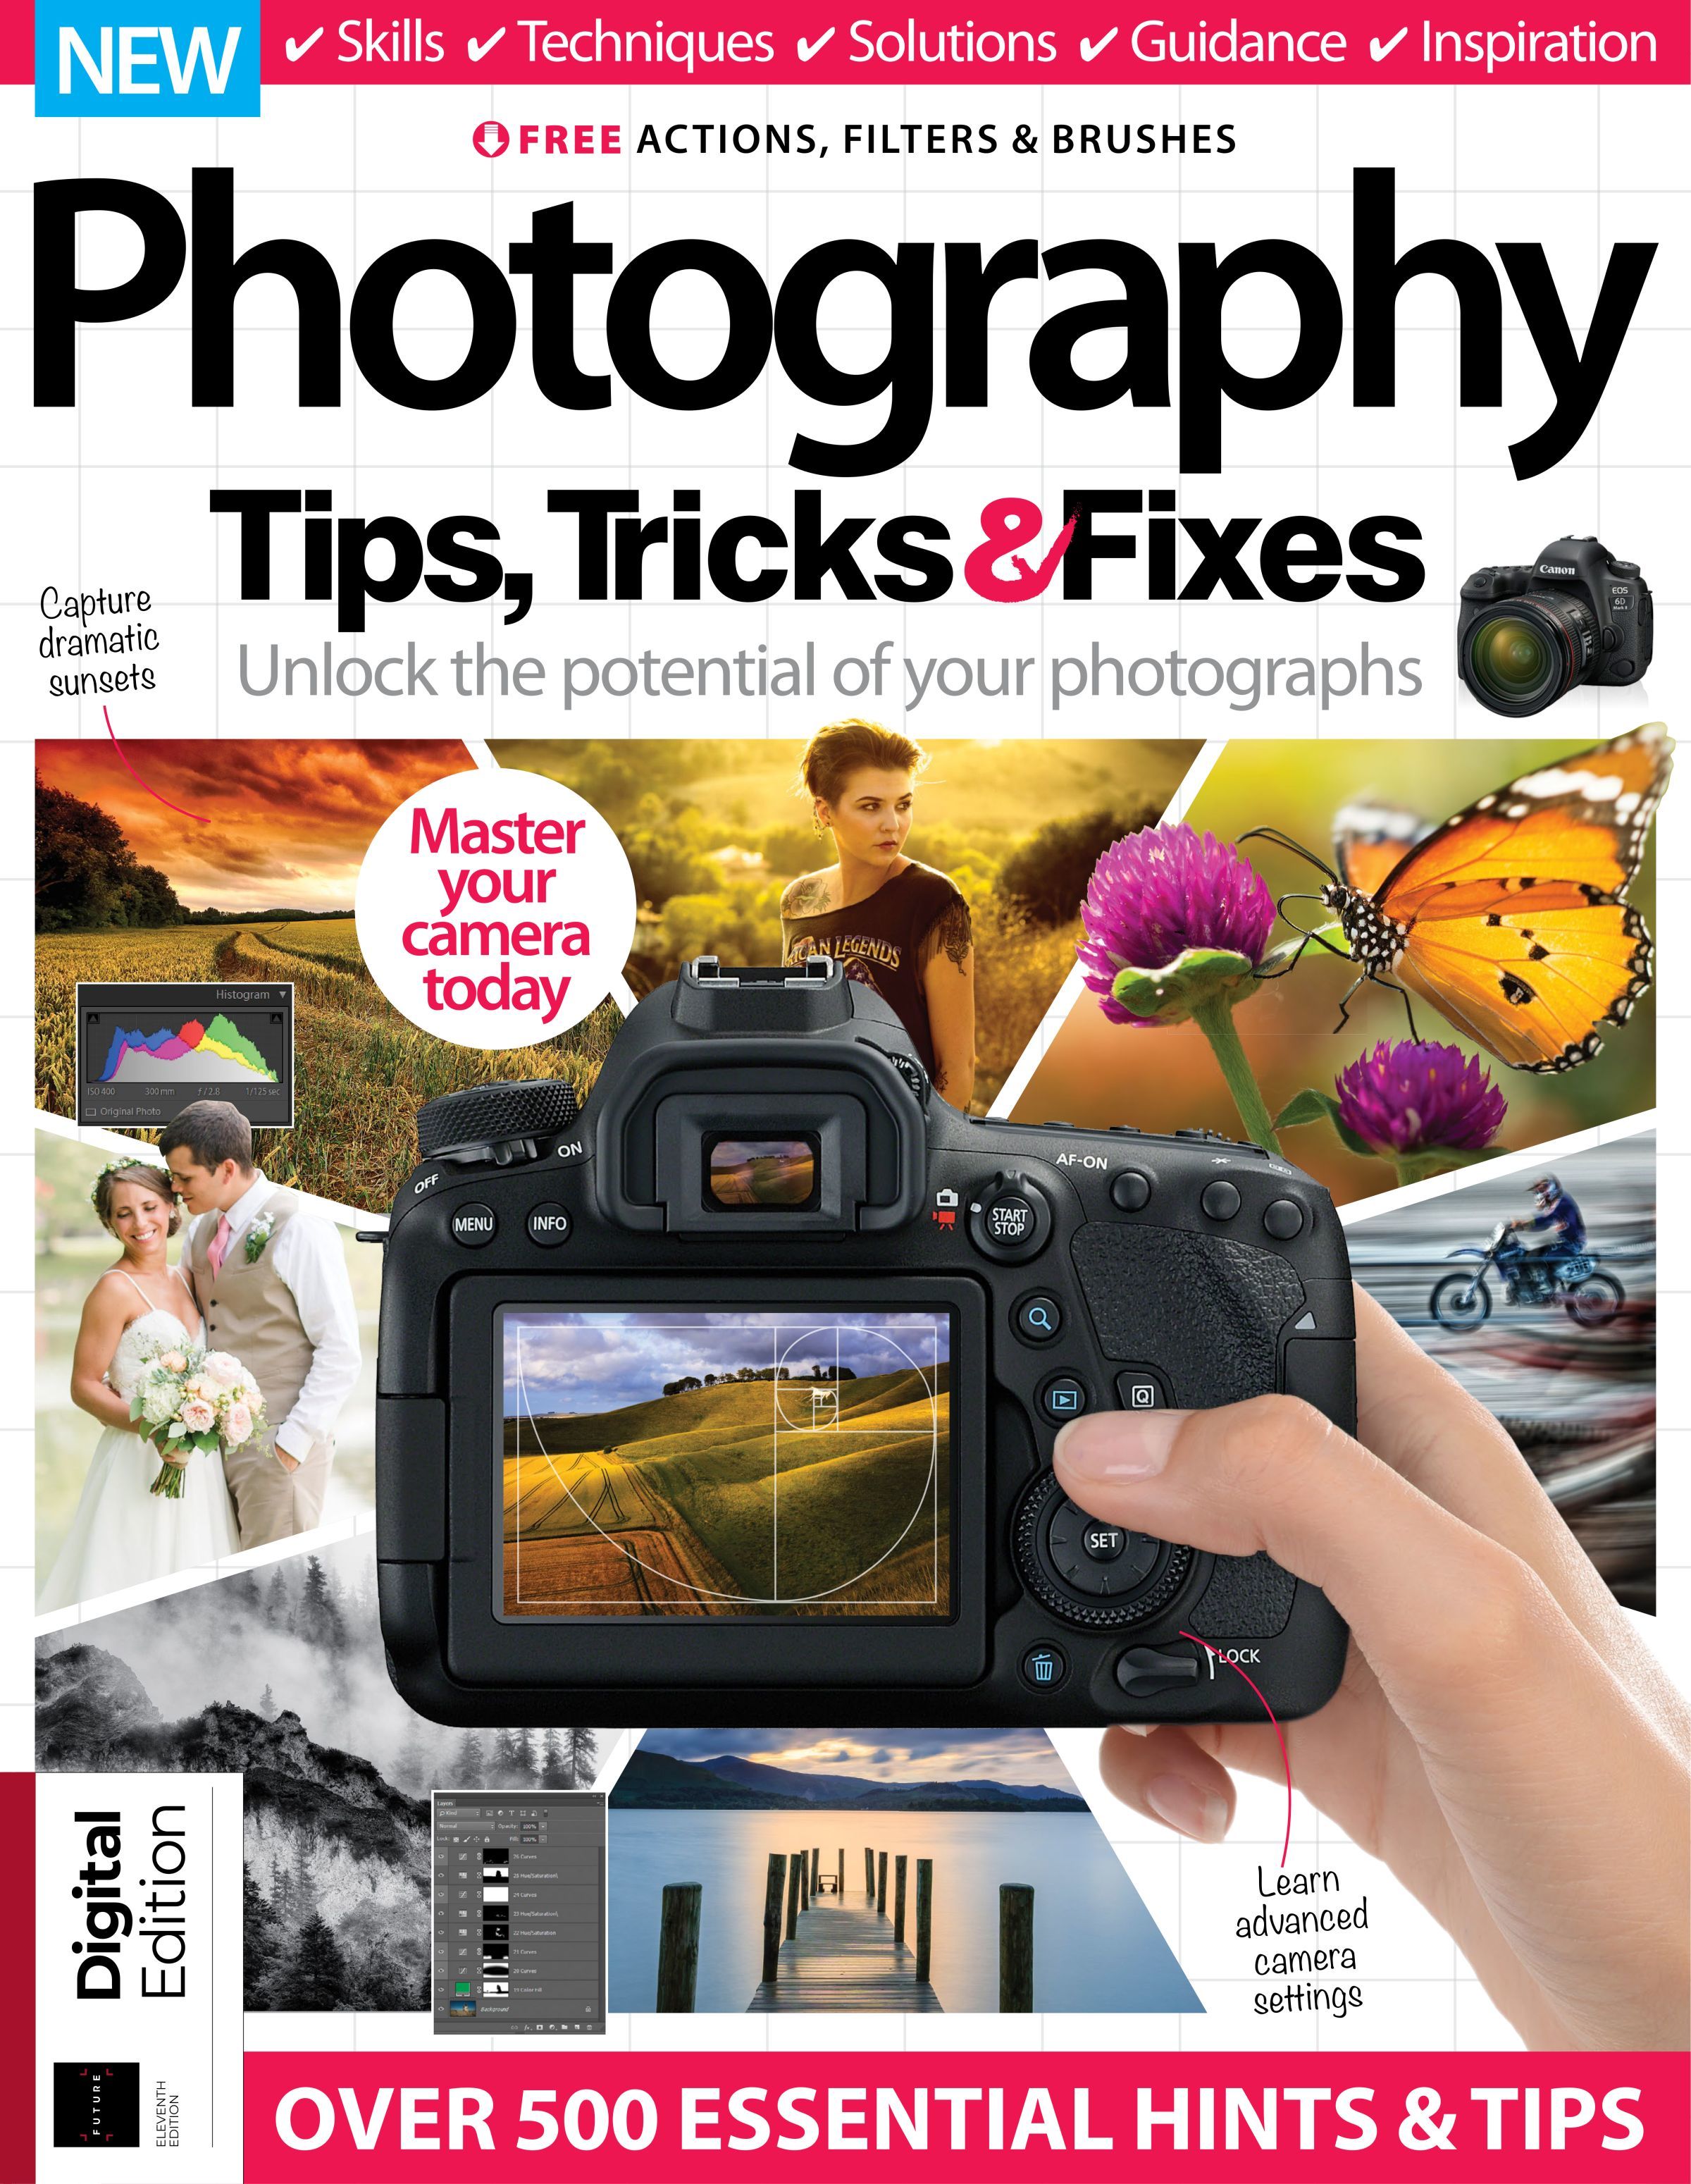 Photography Tips, Tricks & Fixes, 9th Edition